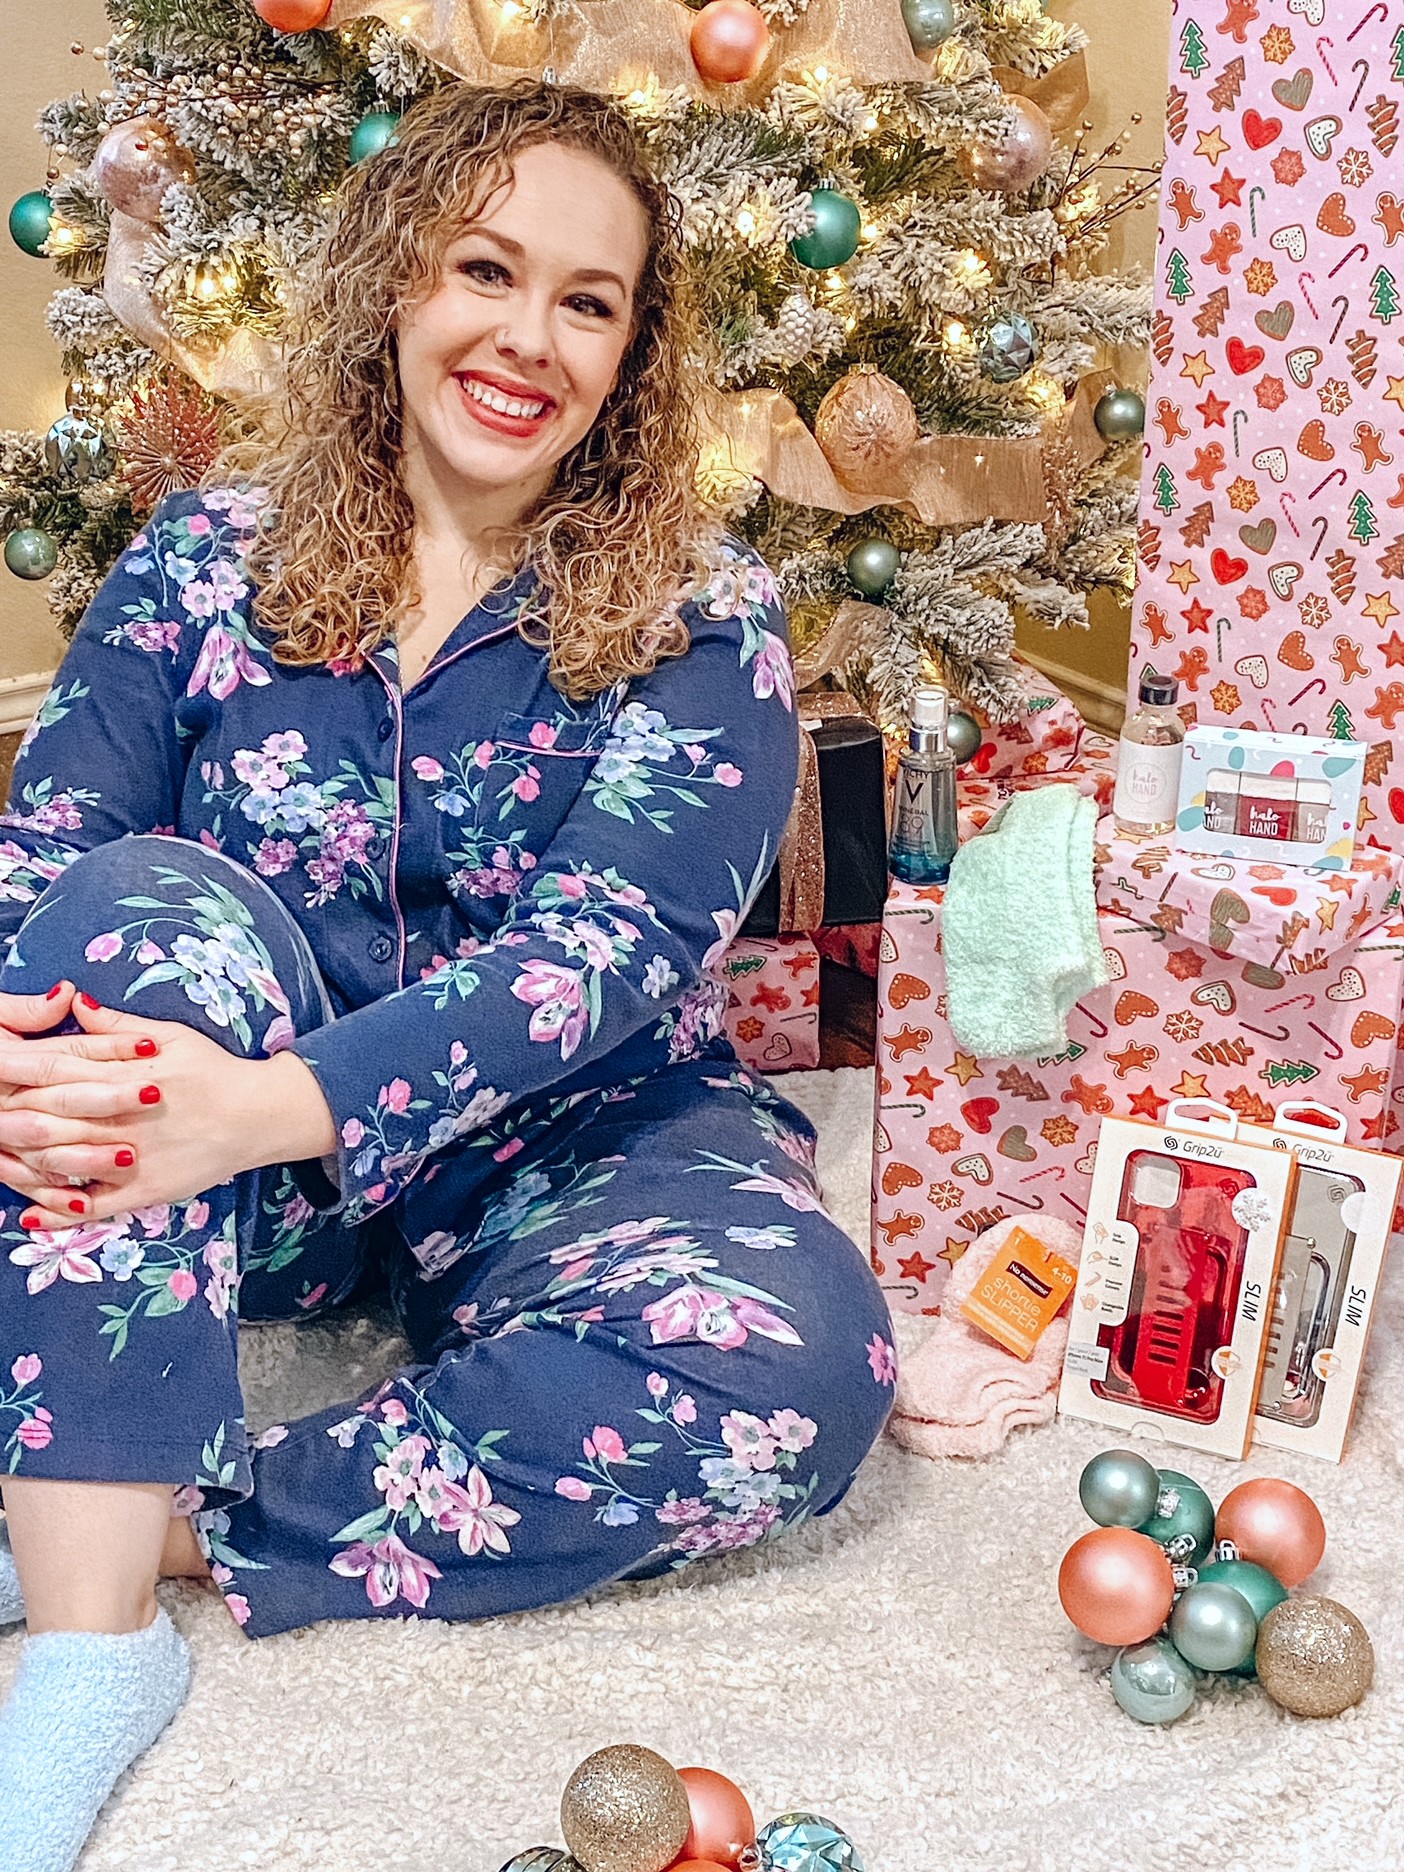 Struggling to figure out what to get the woman in your life? Check out these top Christmas gifts for Her! Everything has been tried so you can't go wrong.